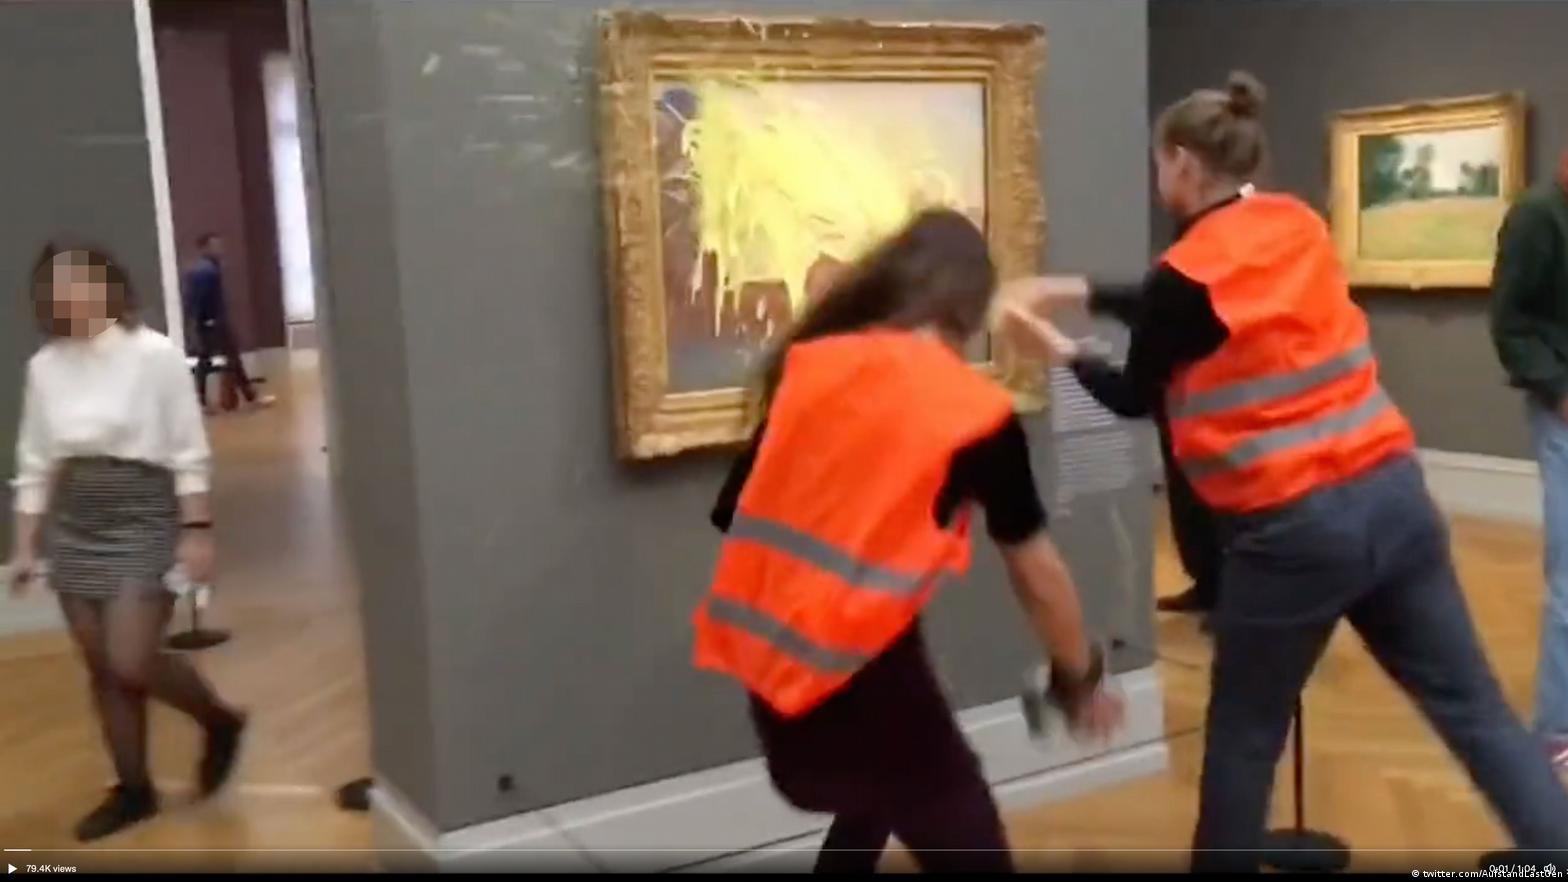 Climate activists fail to glue themselves to 'The Scream' painting